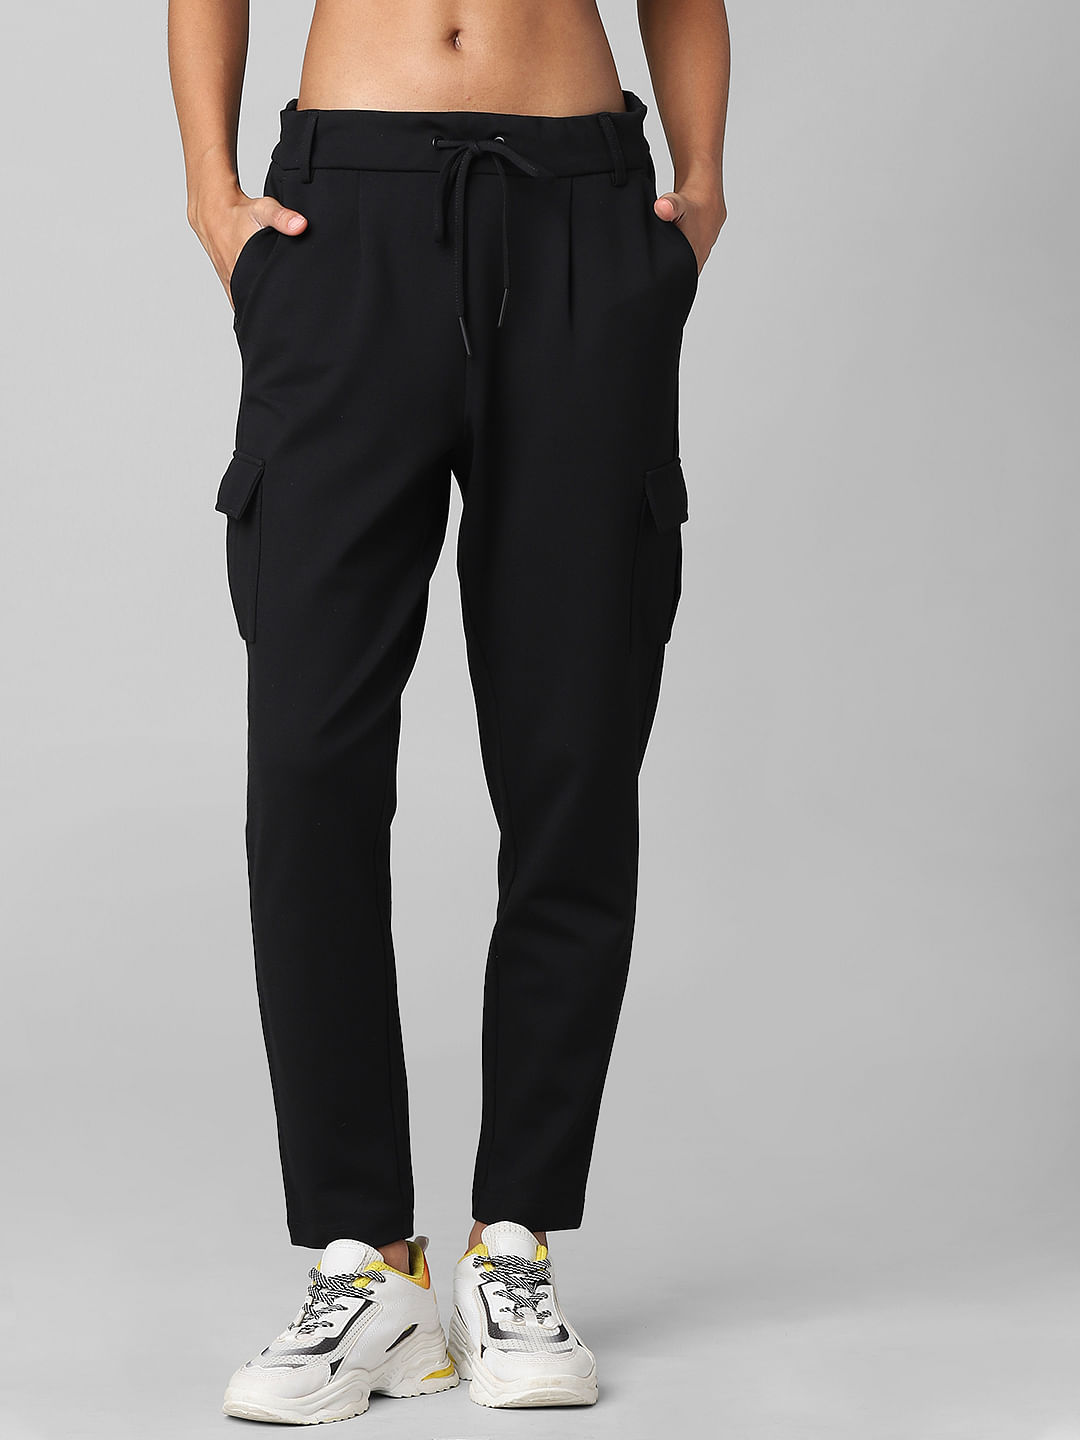 Buy Tokyo Talkies High Waist Cargo Pants for Women Online at Rs709  Ketch